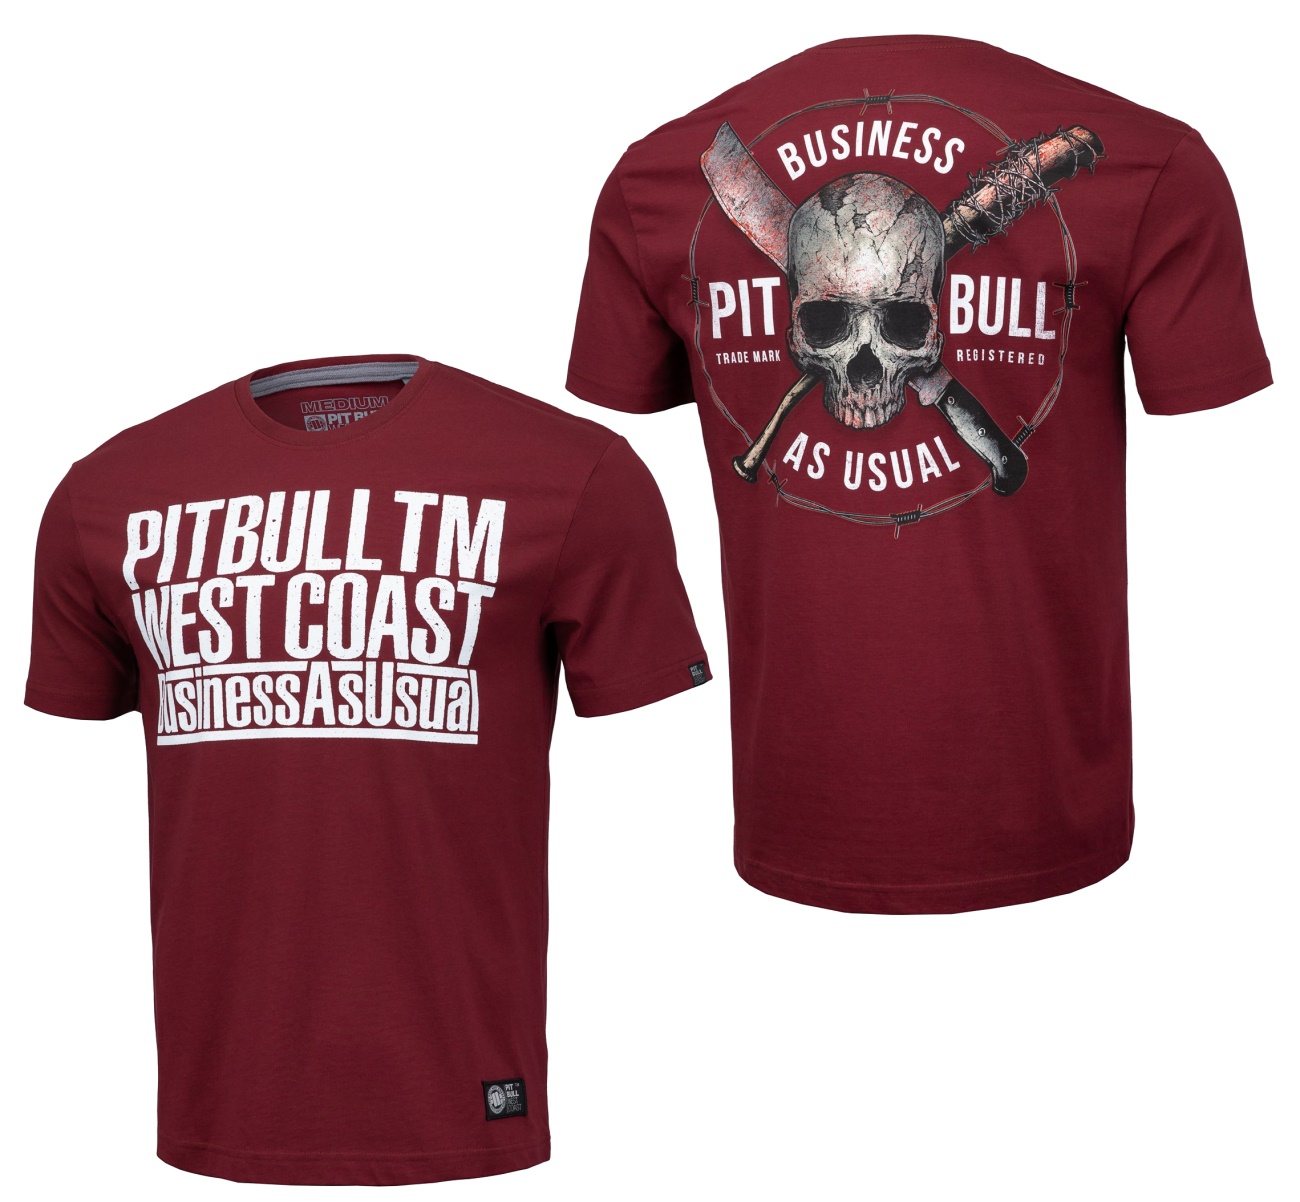 Pit Bull West Coast T-Shirt Business As Usual - Pit Bull Shop - TS21032690b